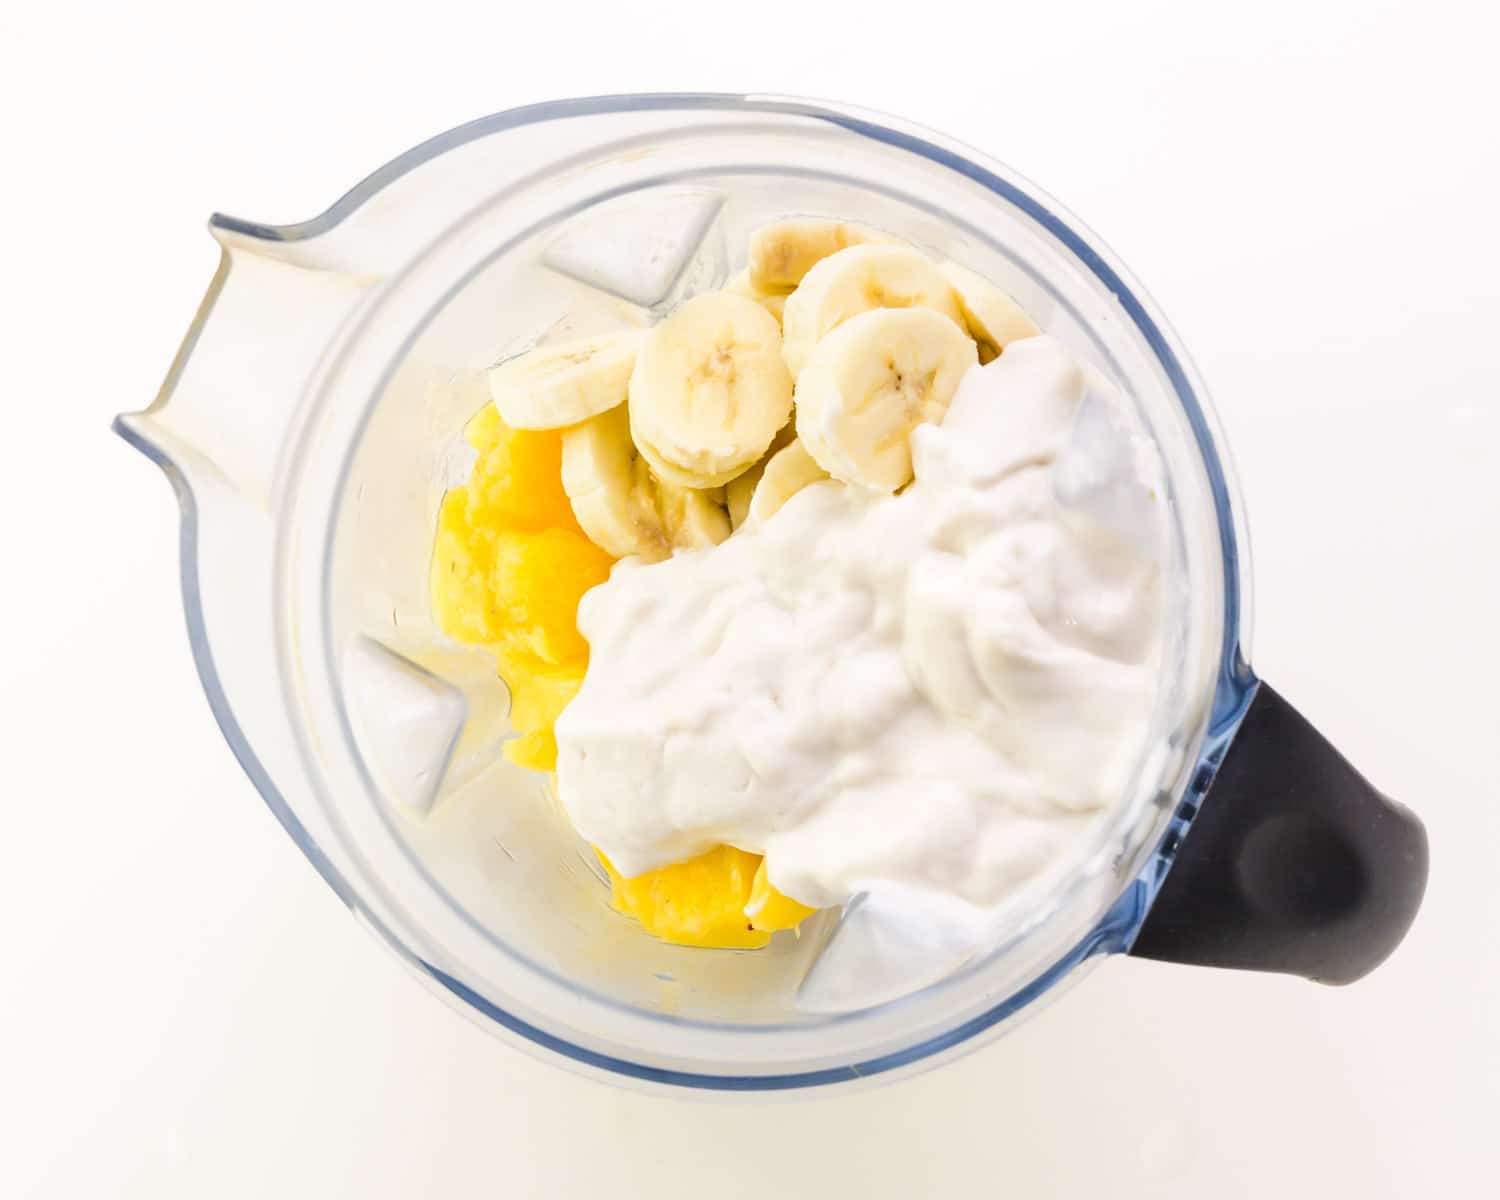 The ingredients are in a blender with pineapple and banana.